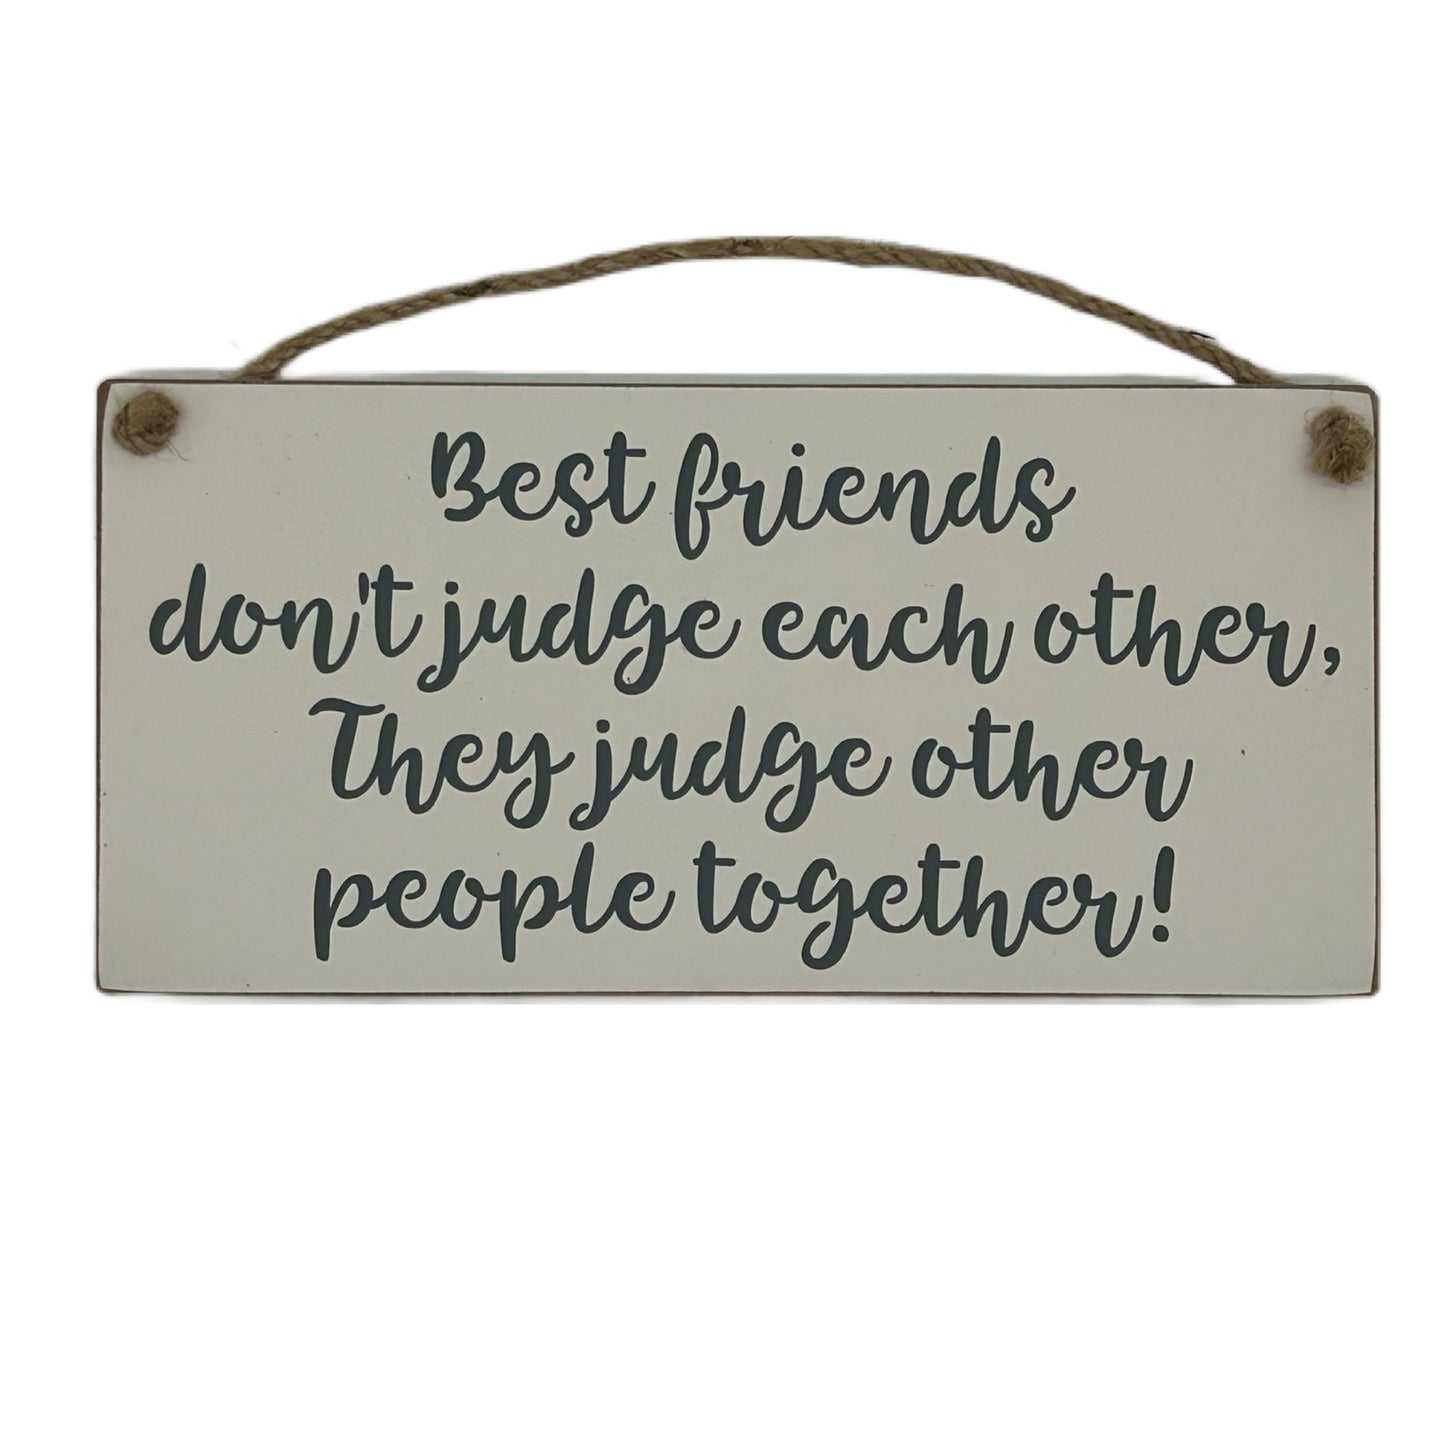 Best friends don't judge each other, they judge other people together!